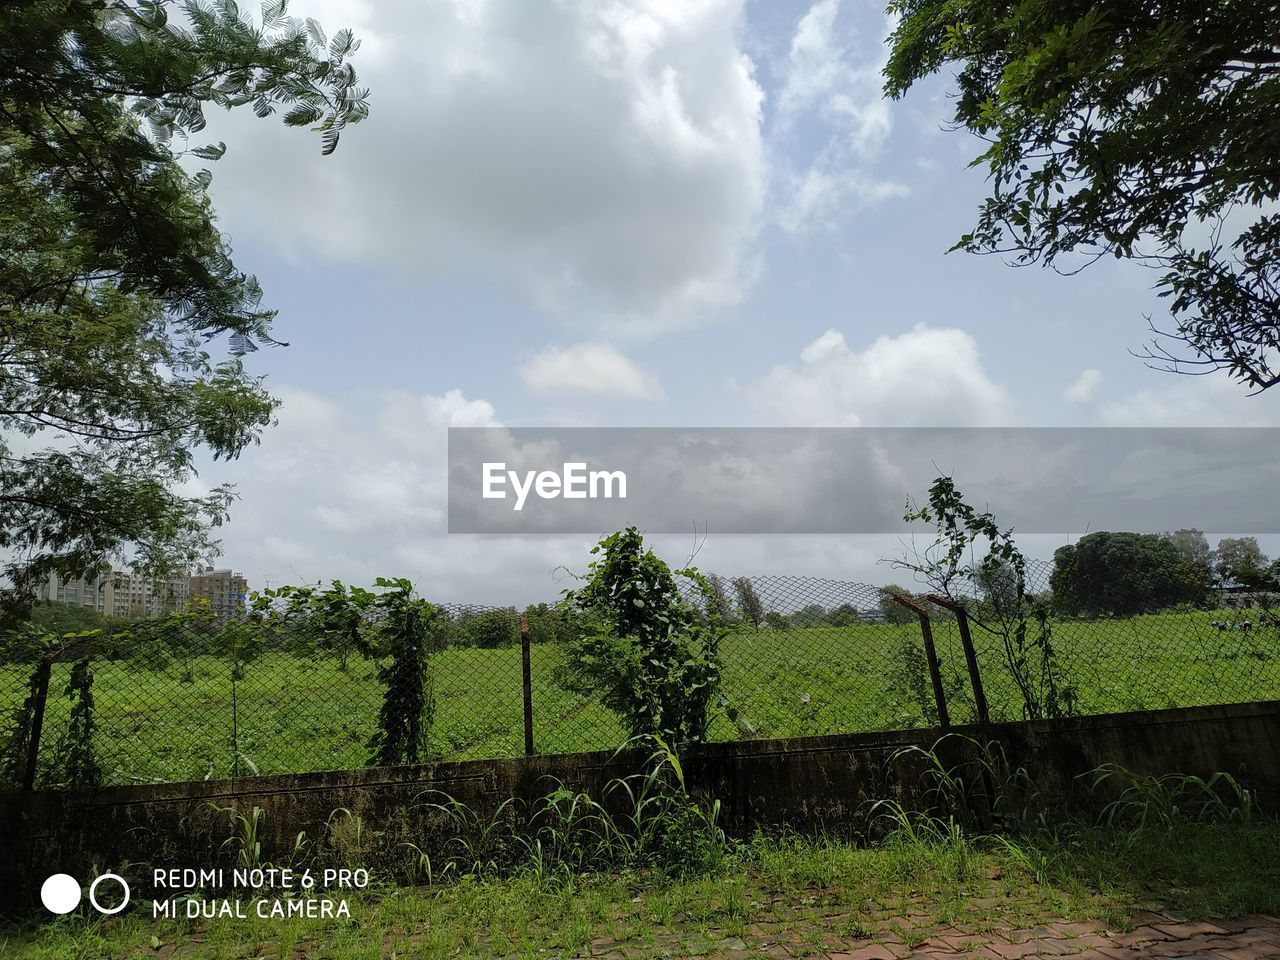 plant, cloud, tree, sky, rural area, grass, nature, fence, landscape, no people, pasture, field, land, environment, green, farm, growth, day, agriculture, meadow, outdoors, protection, security, rural scene, beauty in nature, tranquility, scenics - nature, text